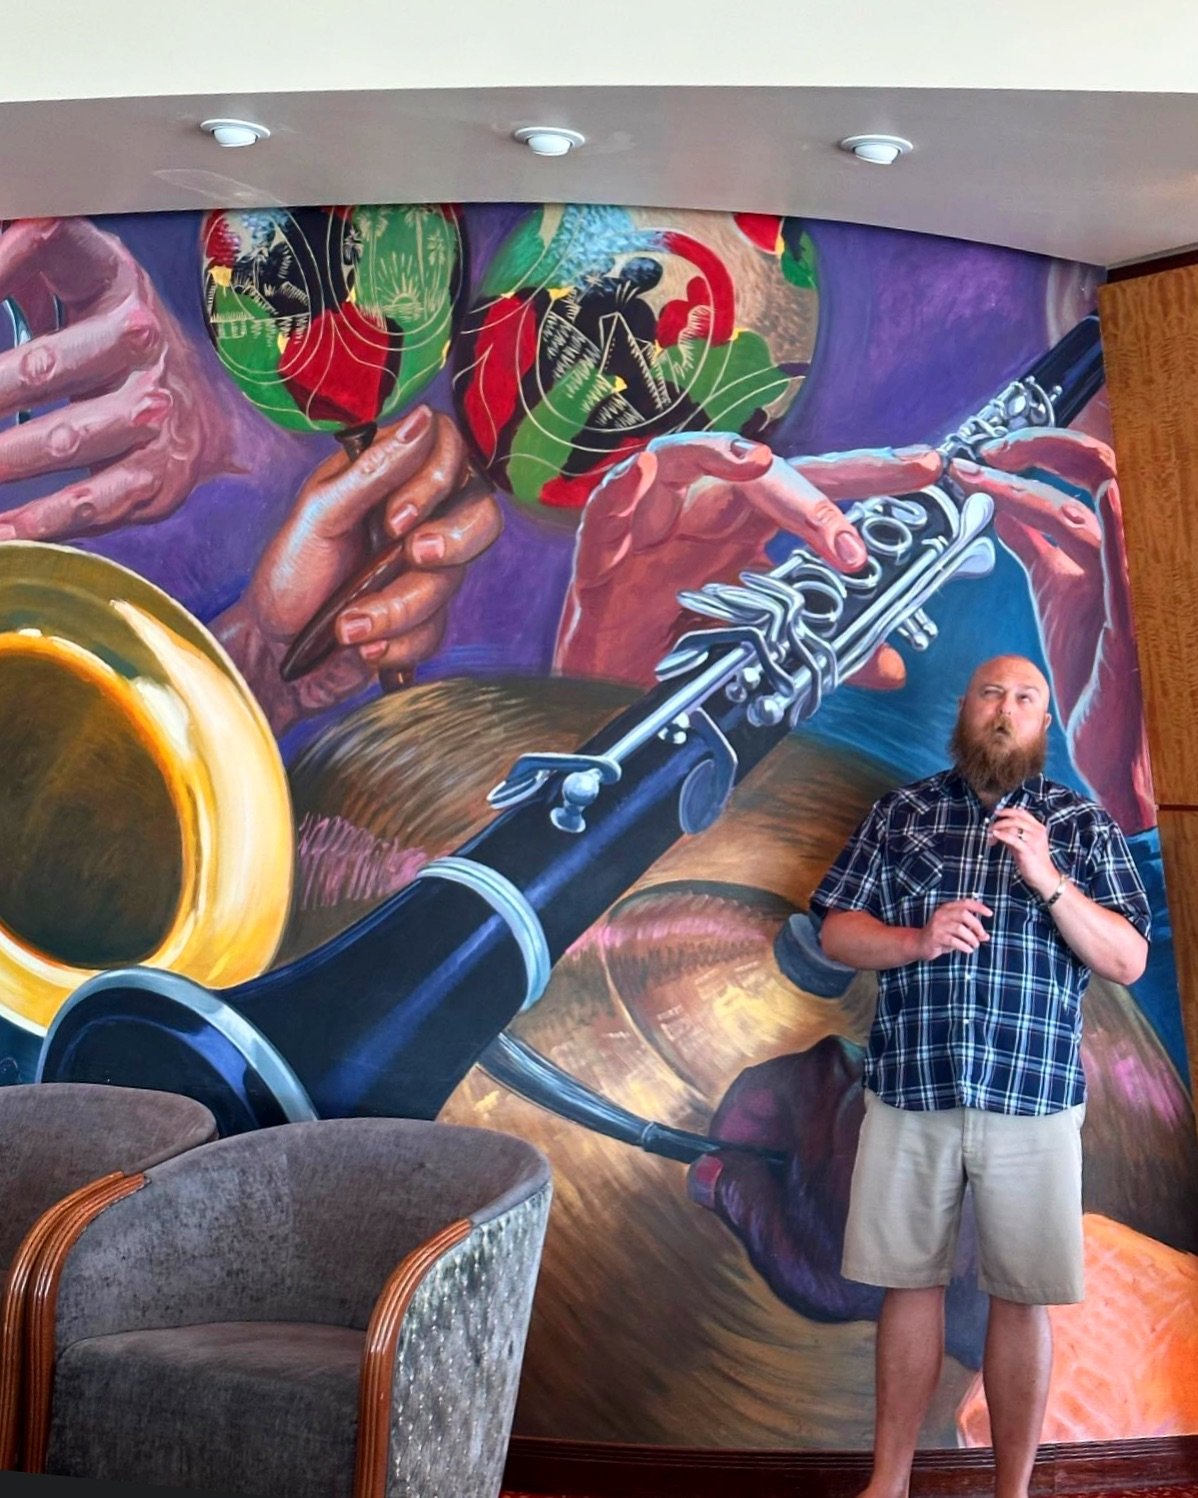 ☝️🤓 PPCE Travel Tip: When traveling, ALWAYS stop and take a picture with ALL images featuring a clarinet 🎶 📸 

#pricklypearclarinets #clarinet #musician #clarinets #travel #traveltips #travelphotography #clarinetist #clarinetplayer #mural #clarine